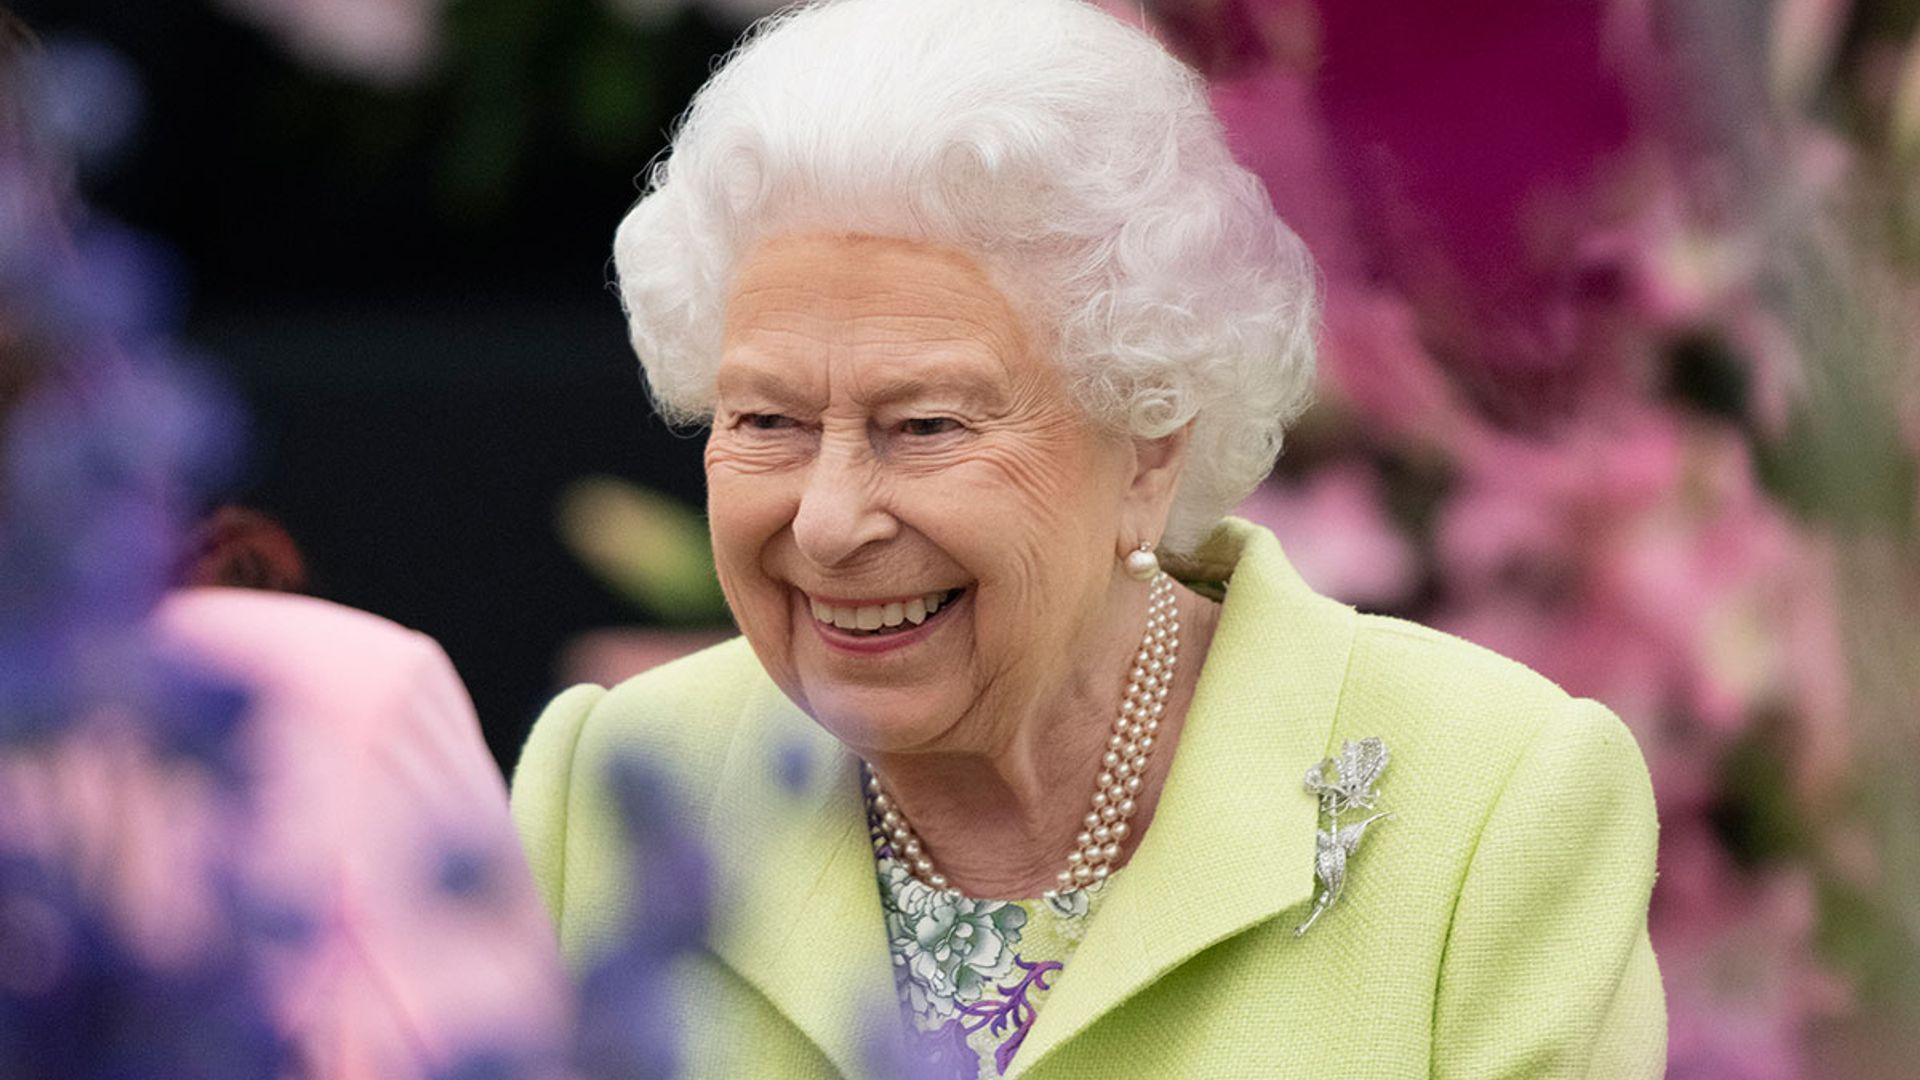 The Queen will be pleased to hear this good news despite coronavirus crisis